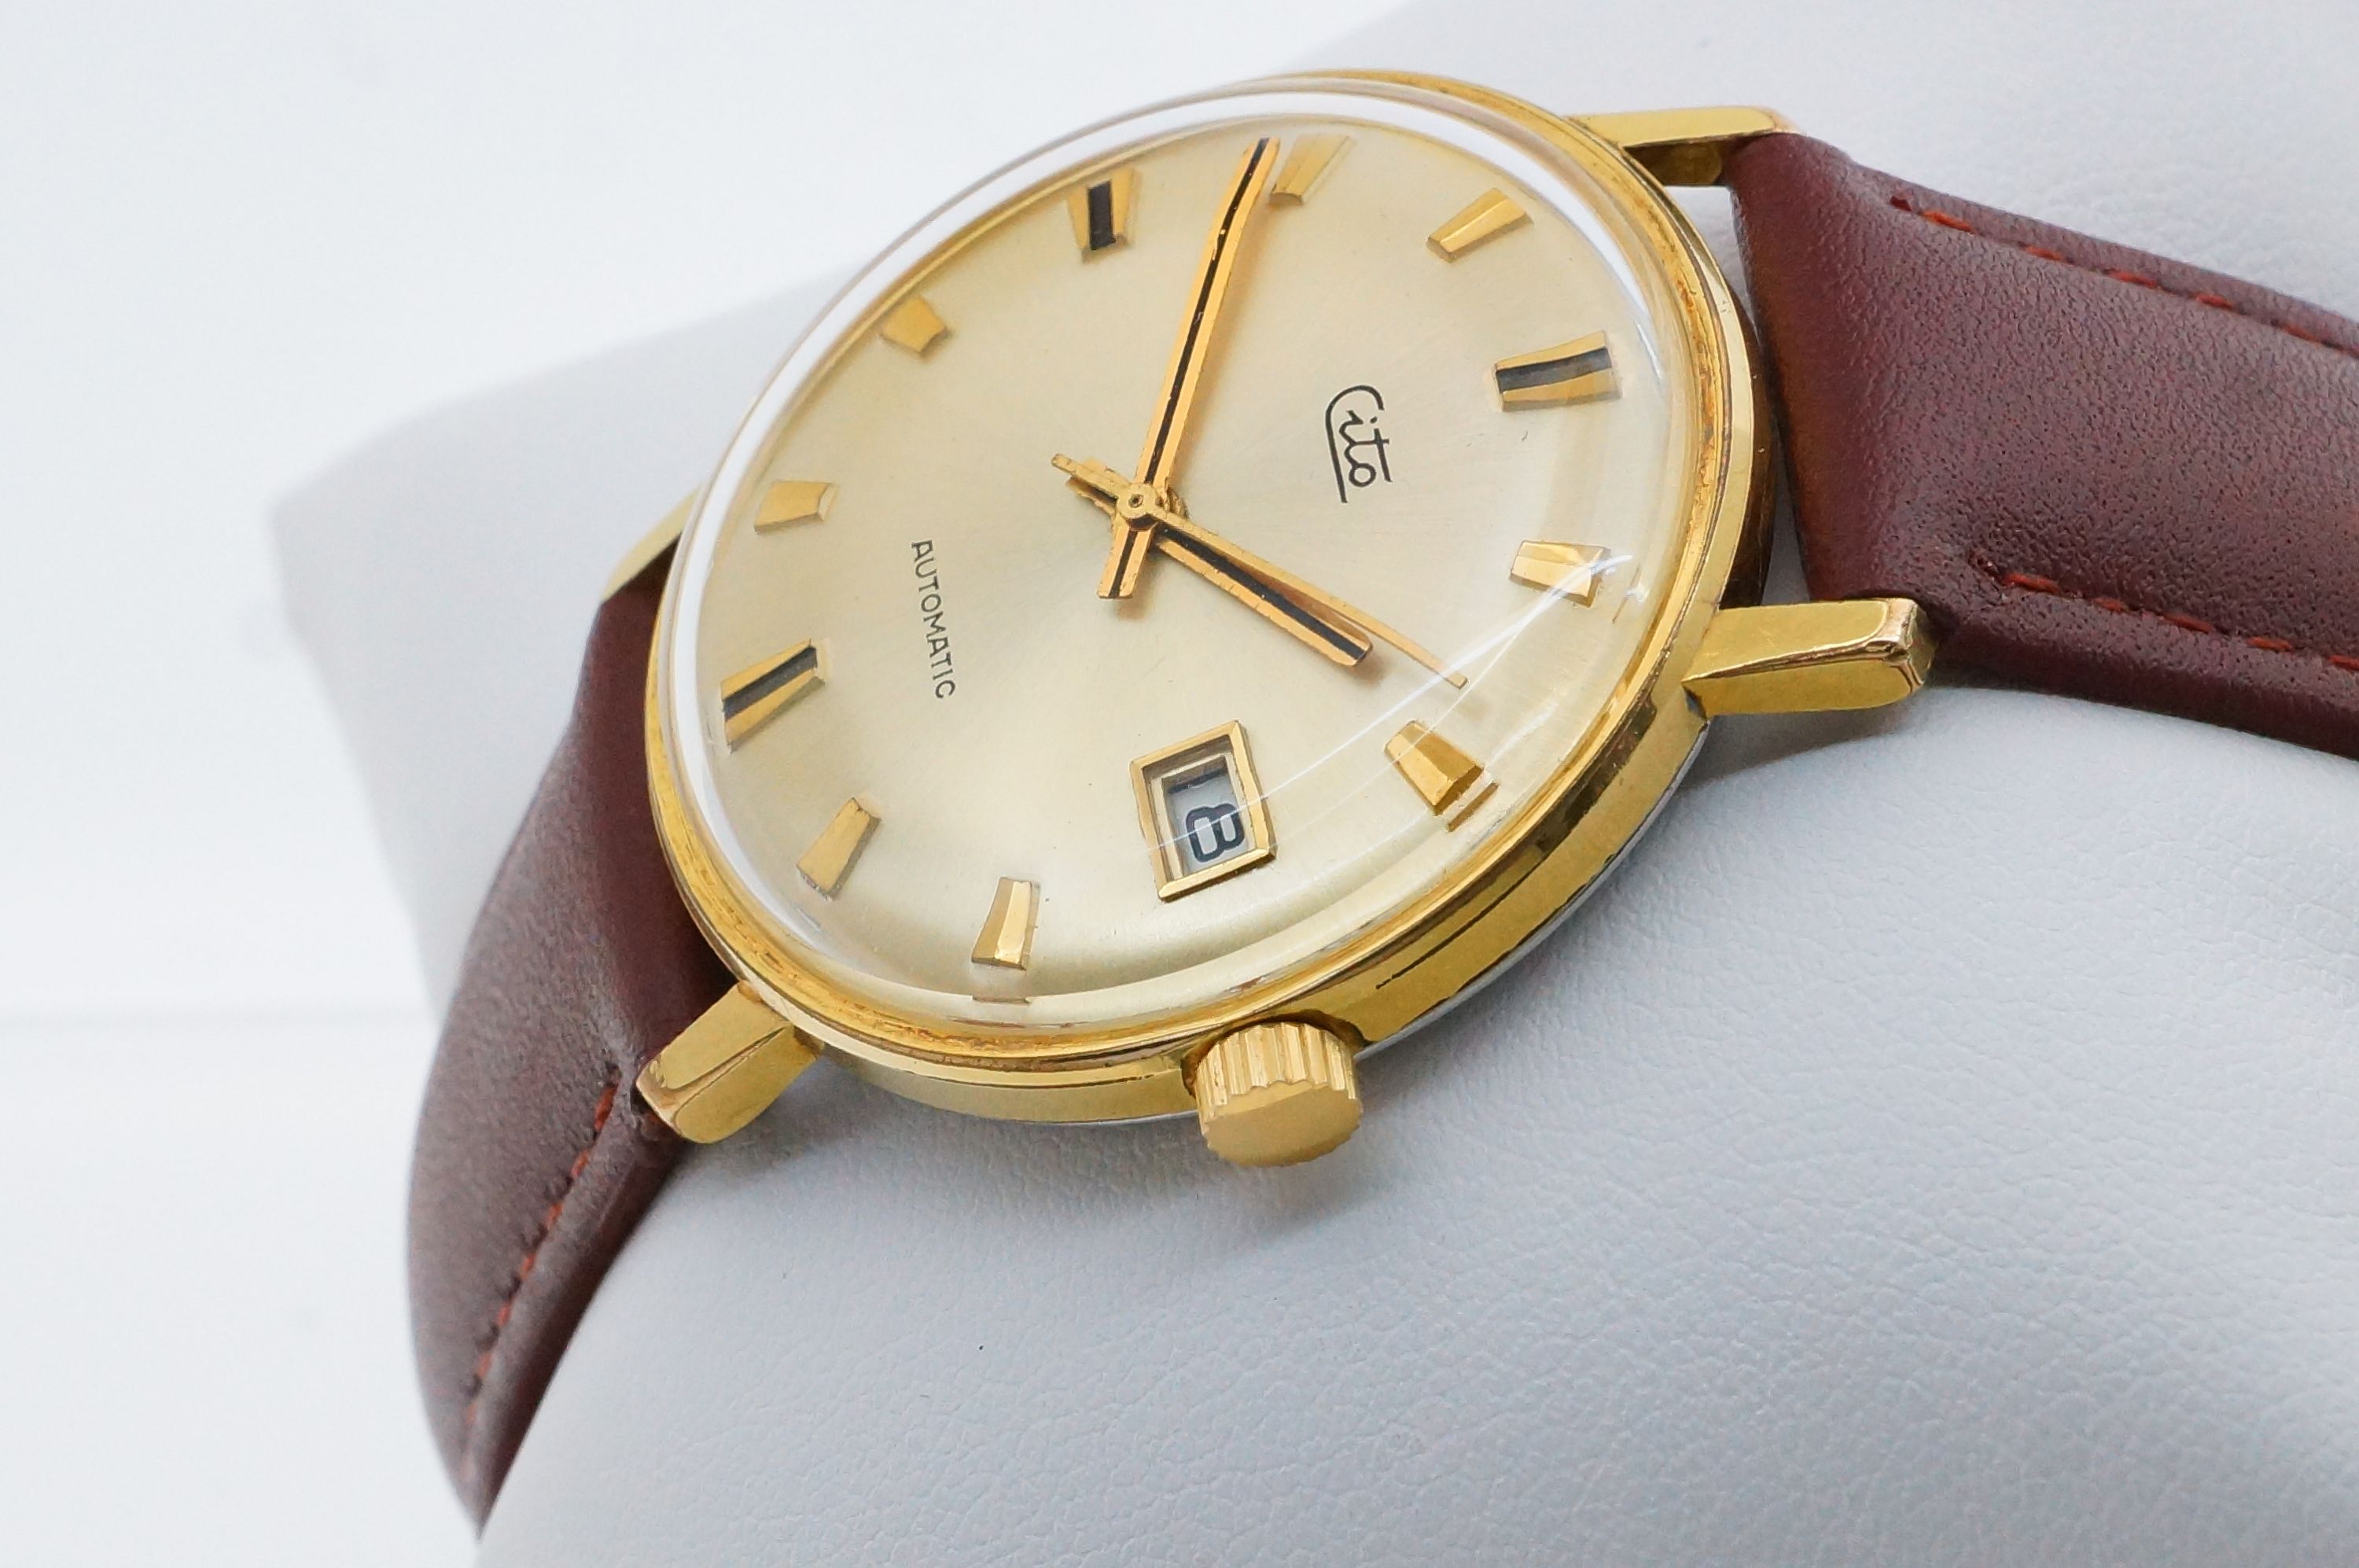 Cito Automatic – AS 1748/49